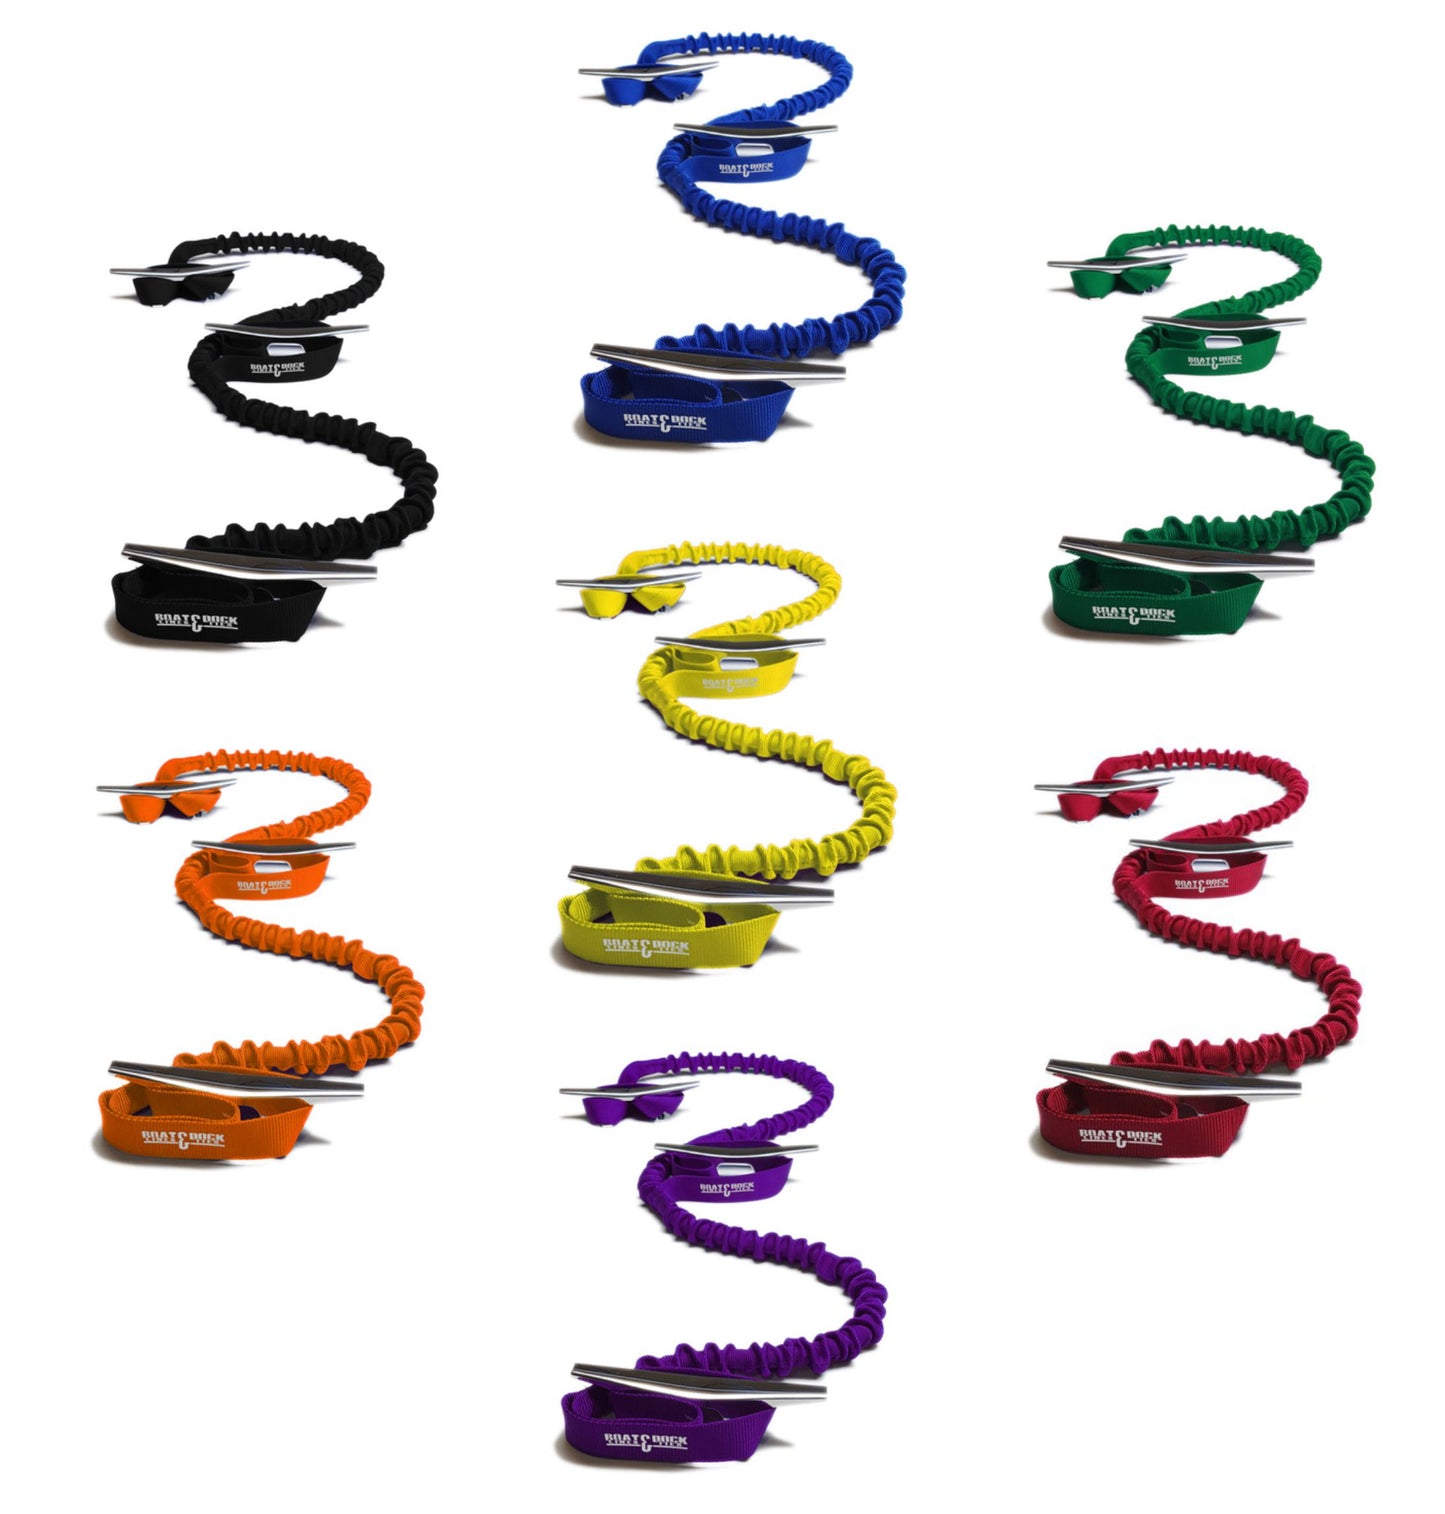 Custom Length 9mm (3/8") Boat Dock Tie Cords with 3 Loops